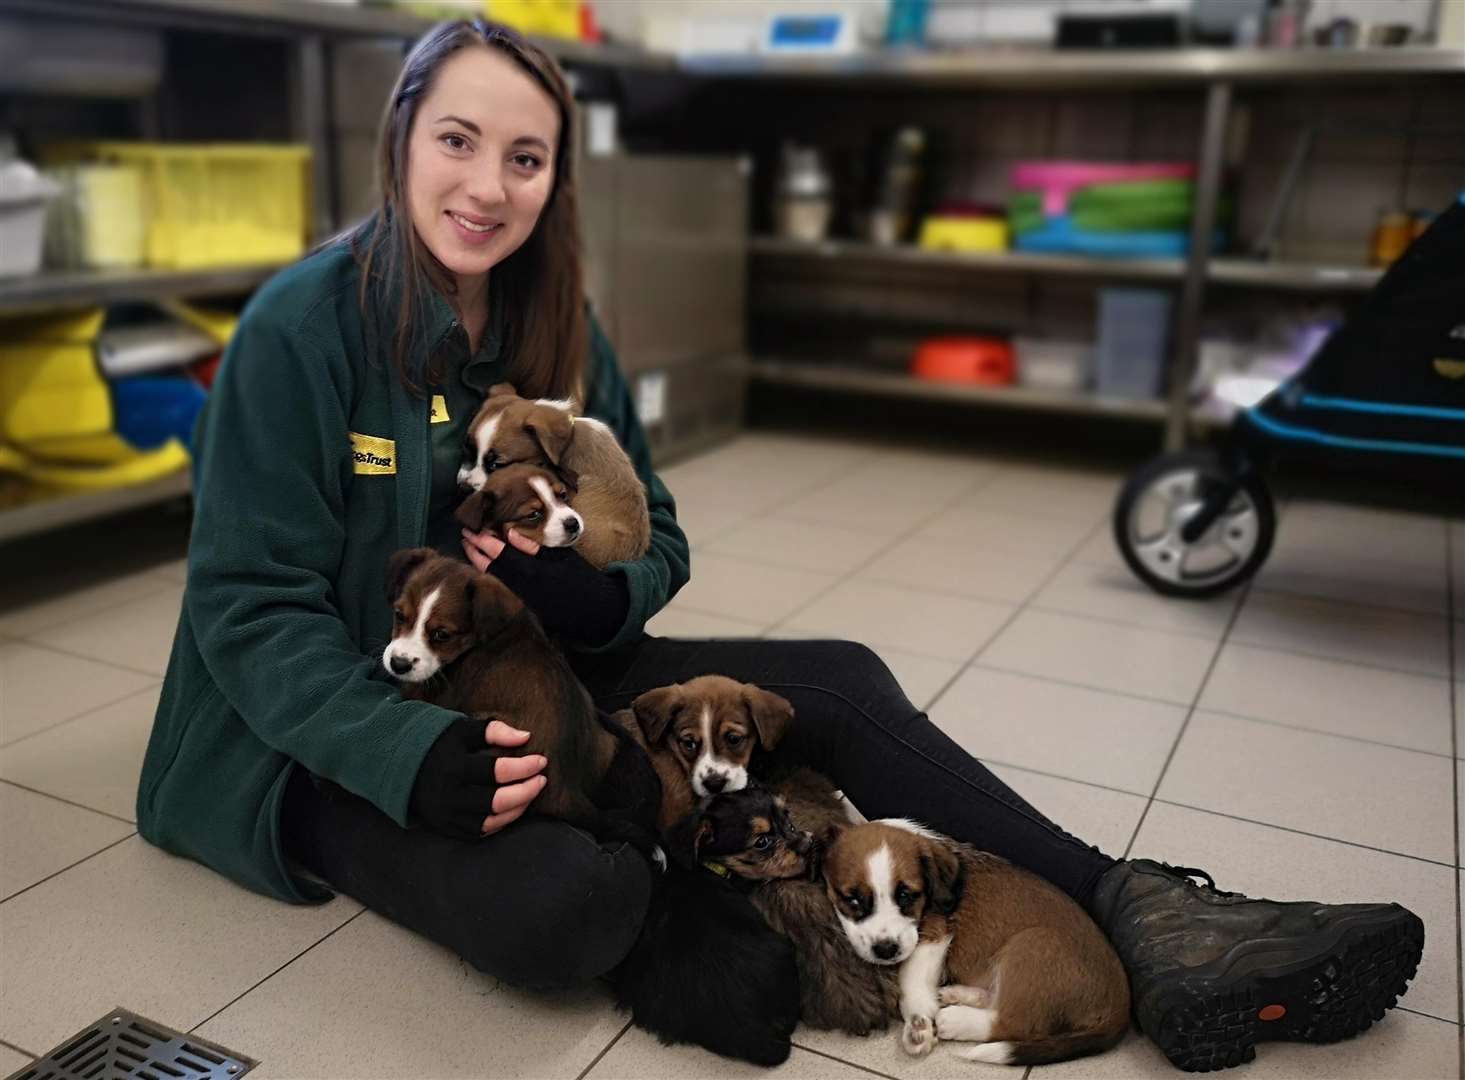 Canine Carer Kelly with the puppies